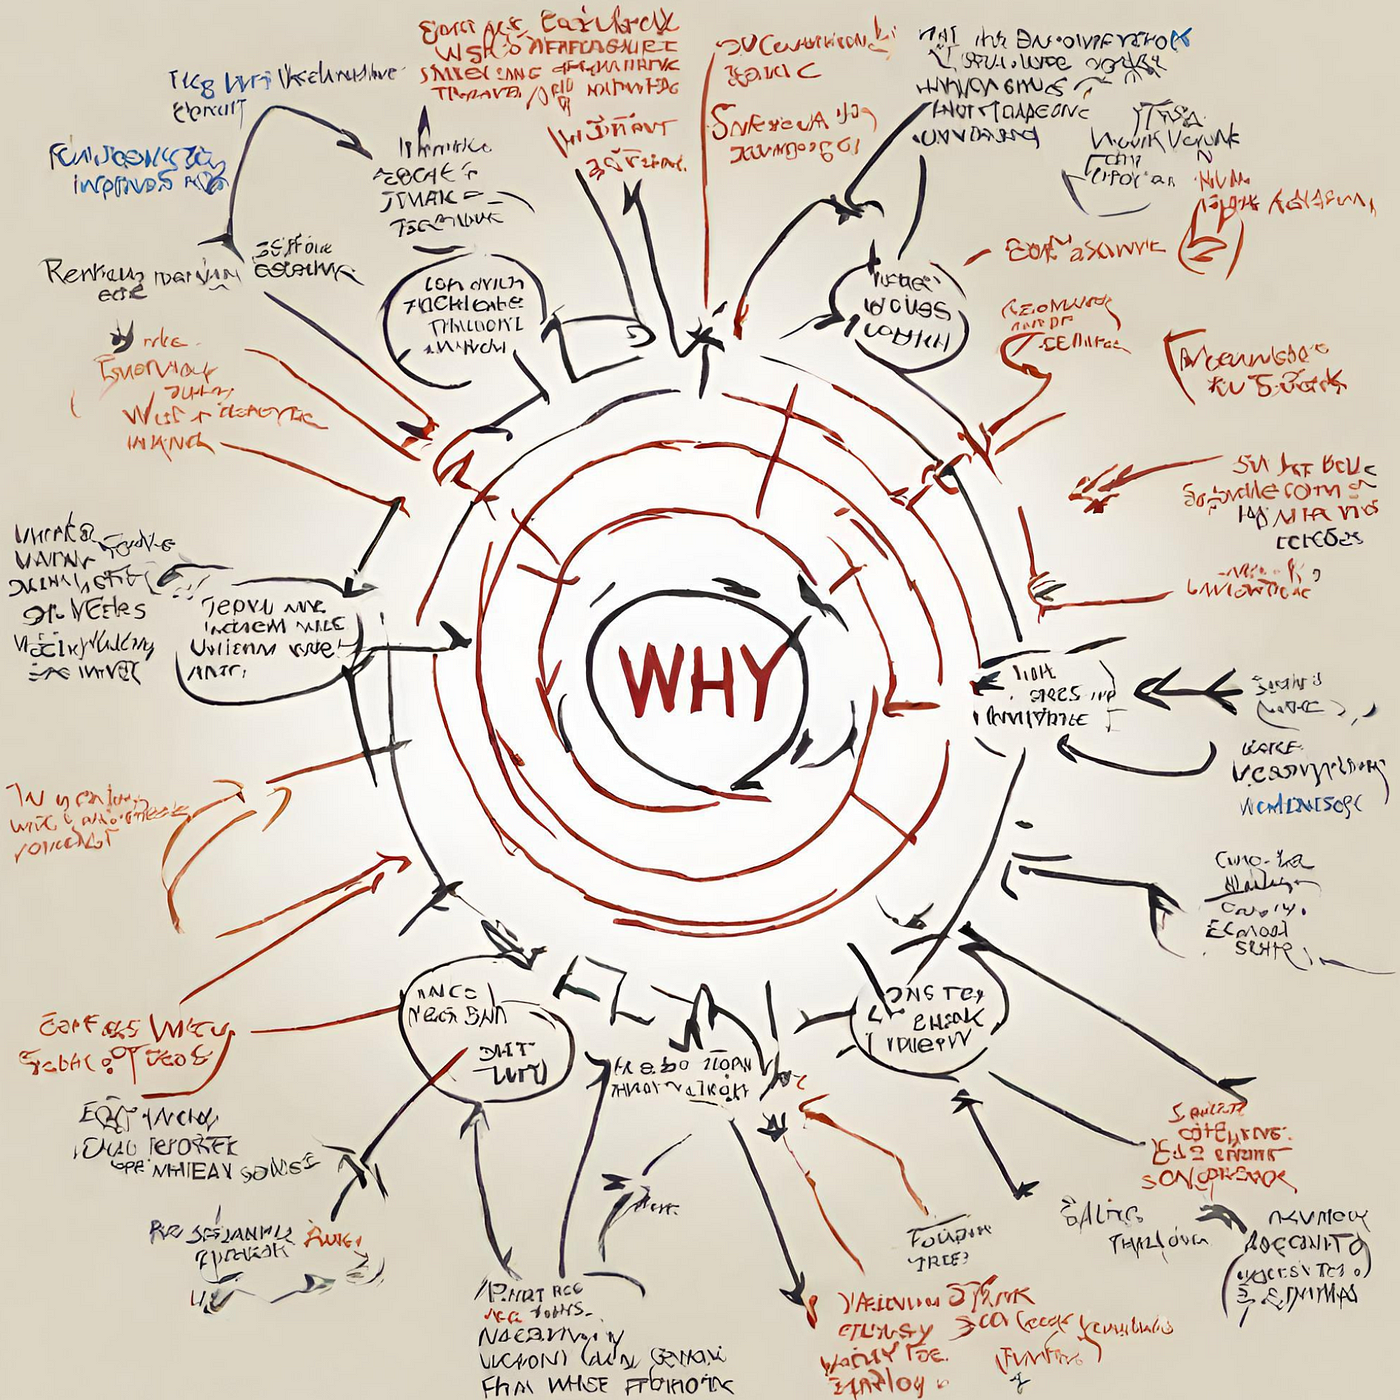 Start with Why: Unpacking Simon Sinek's Insights on Inspiring Leadership, by ANAMIK